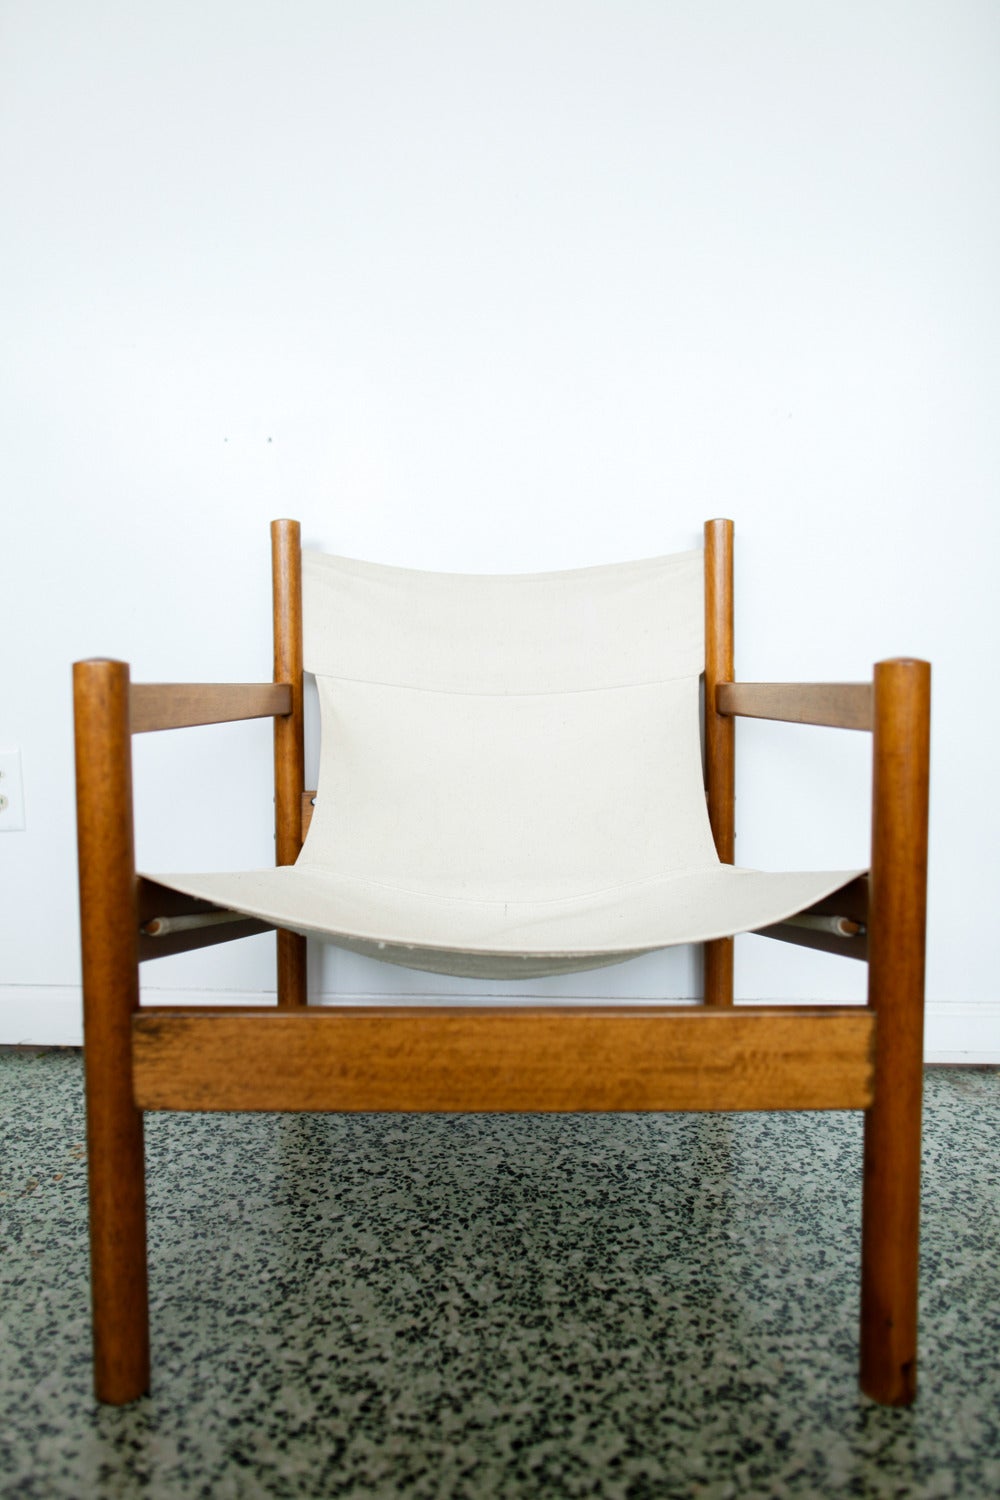 Nice and Classic sling lounge chairs by Michel Arnold safari chairs. Canvas upholstery with beautiful teak frame.